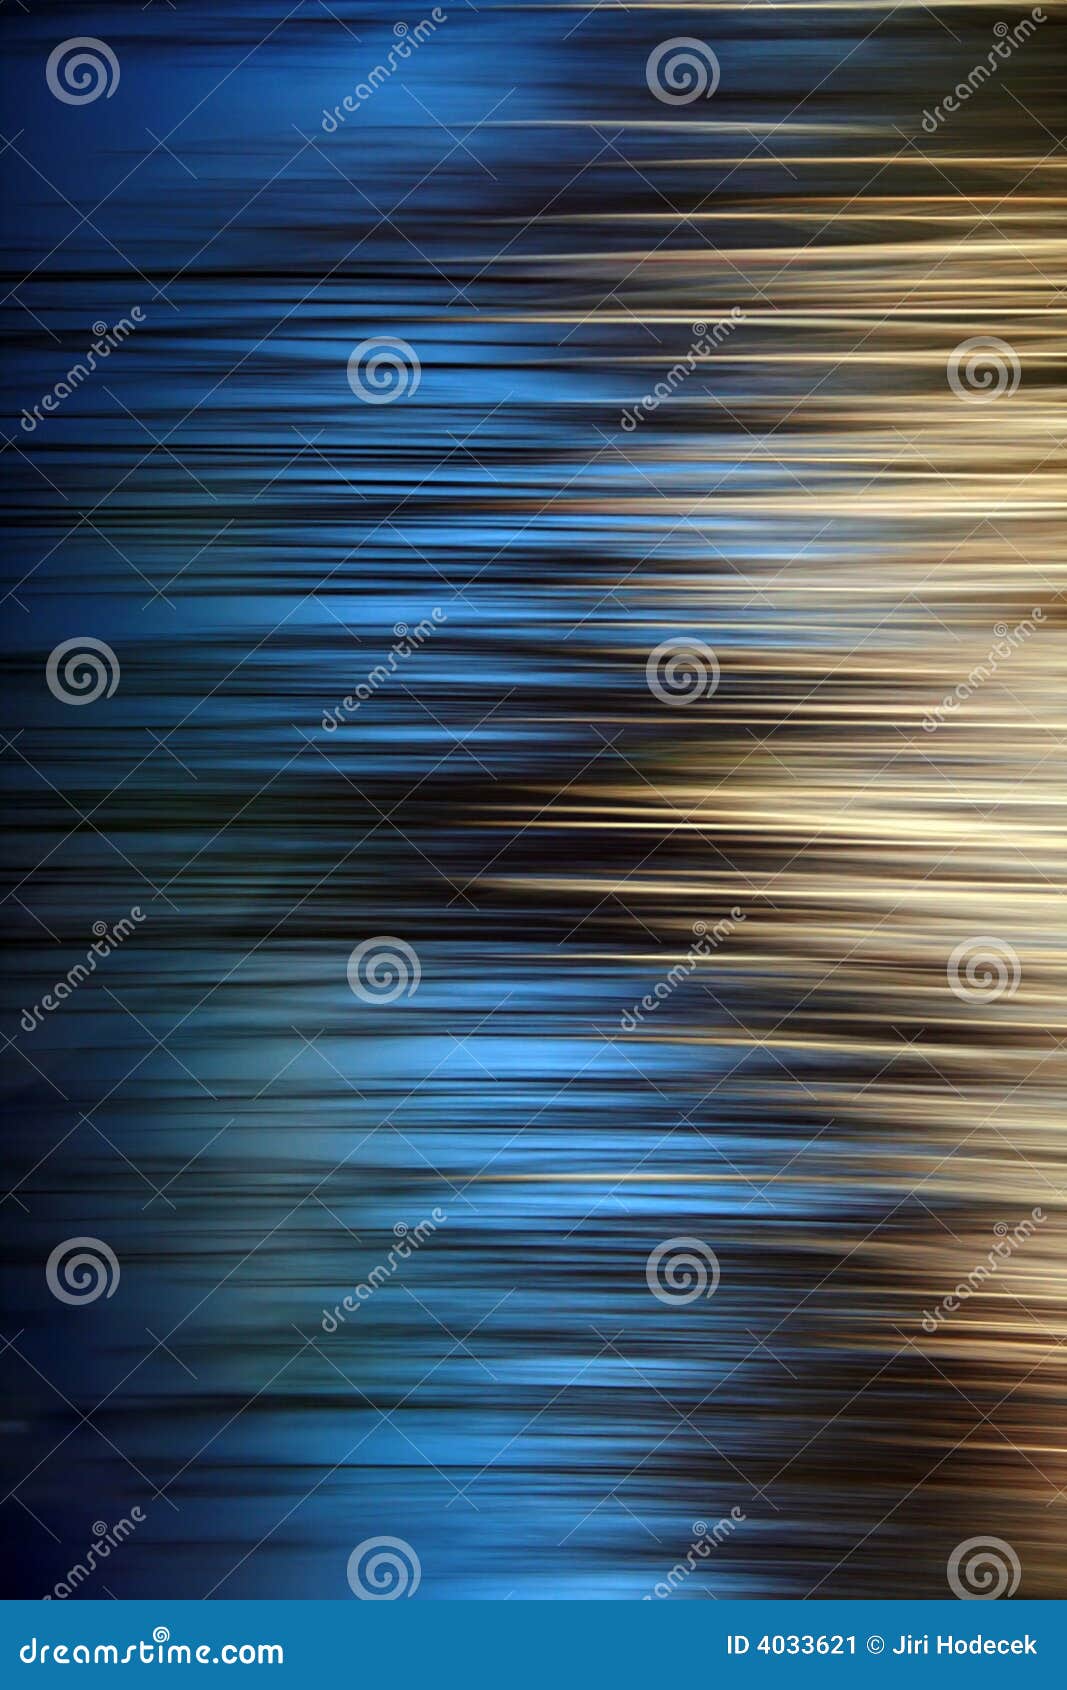 Abstract Background In Motion Stock Image - Image of colorful, blur